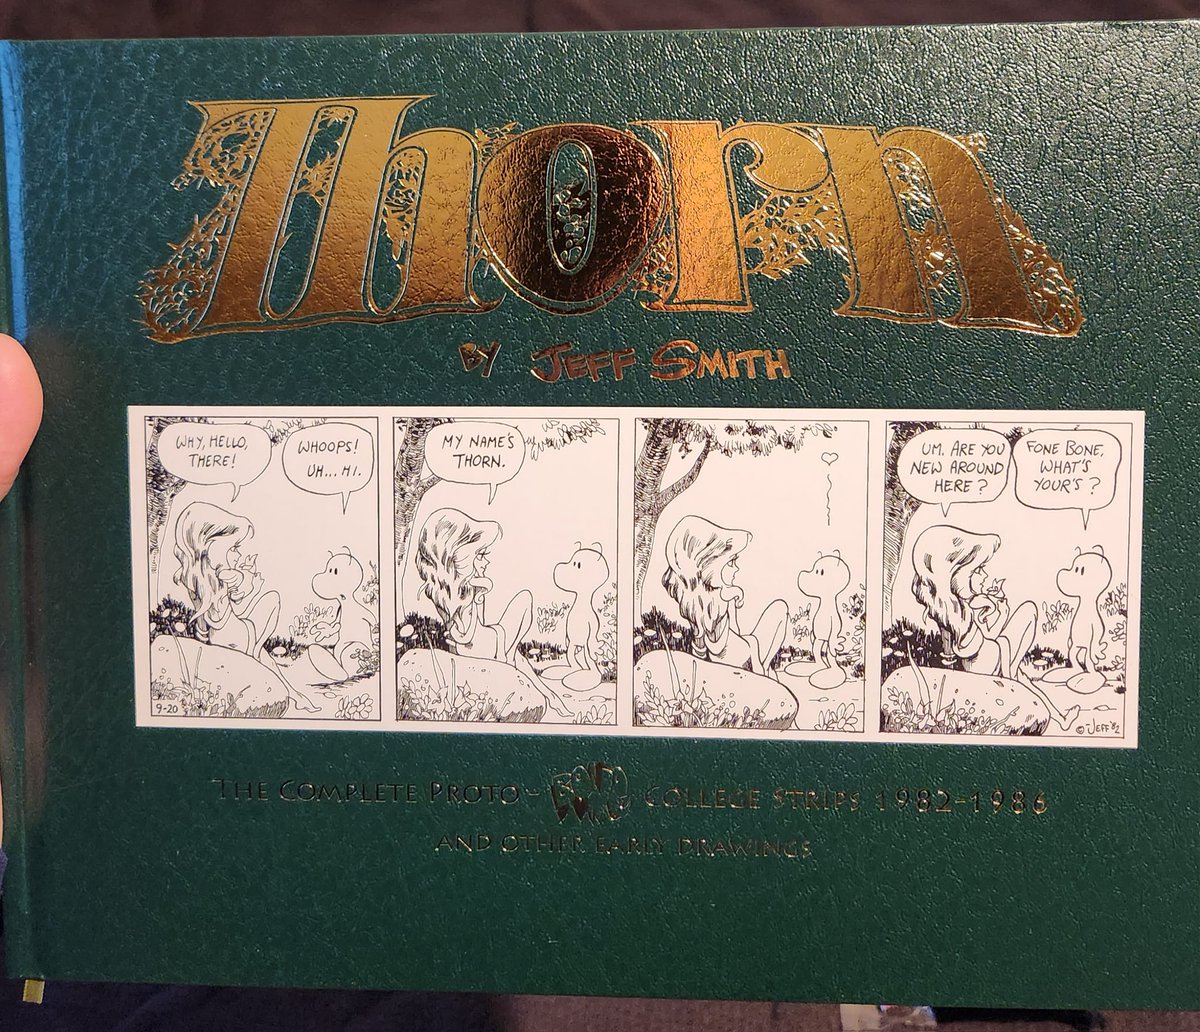 THORN Has Arrived! Backers - thank you for sharing photos and your enjoyment of THORN! #comics #books #graphicnovels #bonecomics #jeffsmith #cartoonbooks #TUKI #RASL #THORN @jeffsmithsbone @cartoonbooksinc